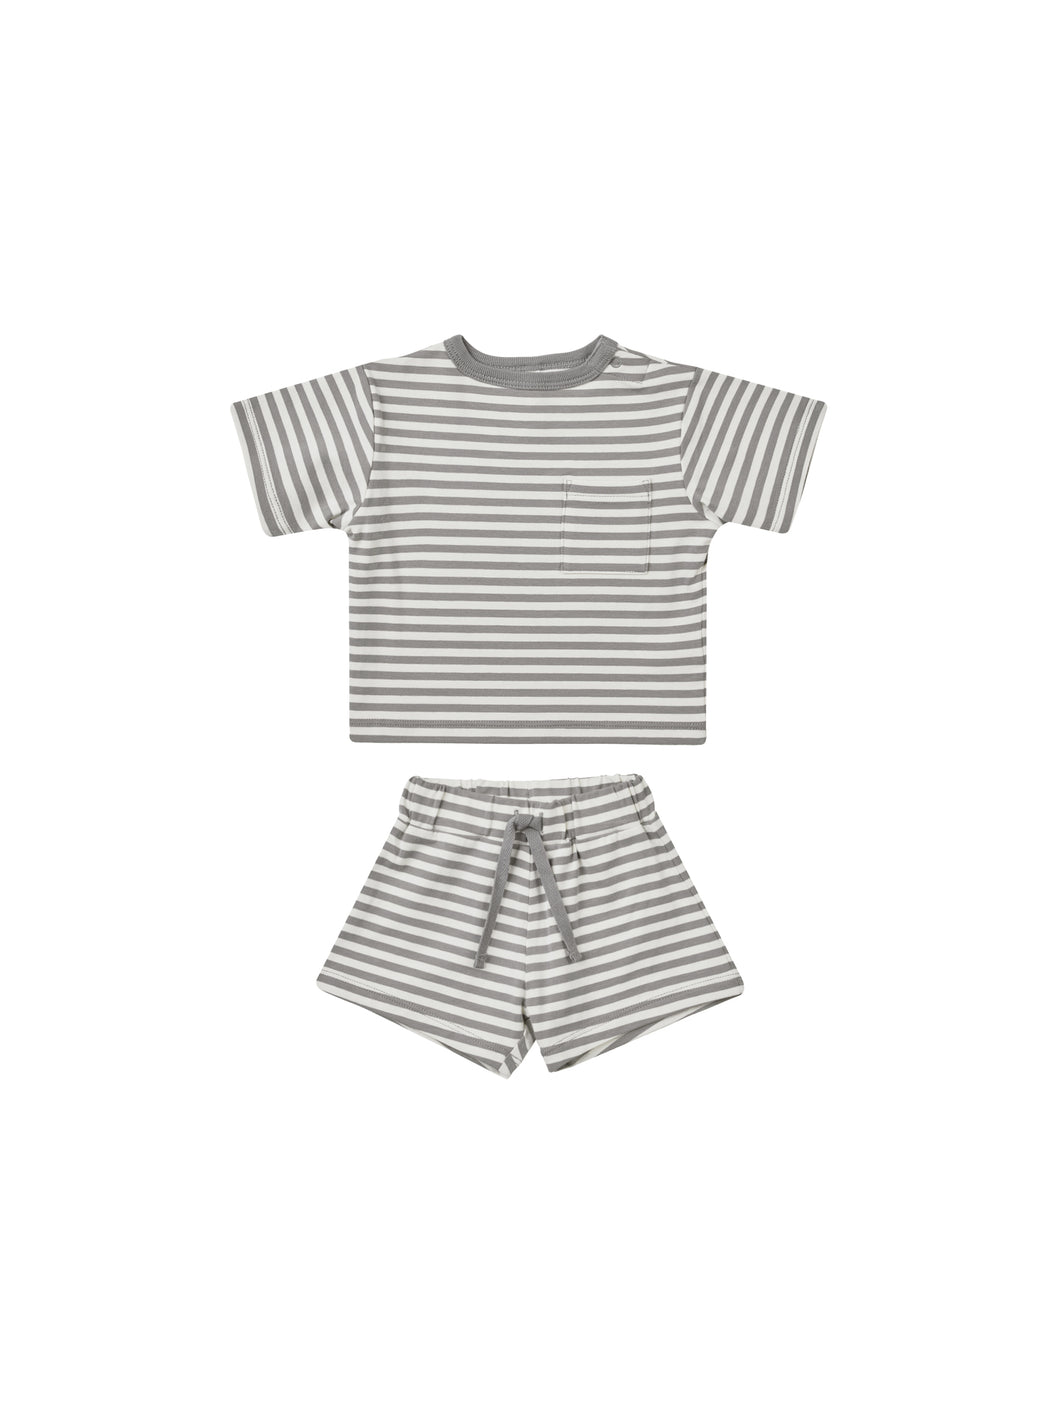 Baby boxy tee with pocket and matching shorts. This set is featuring a dark blue and white stripe pattern. 